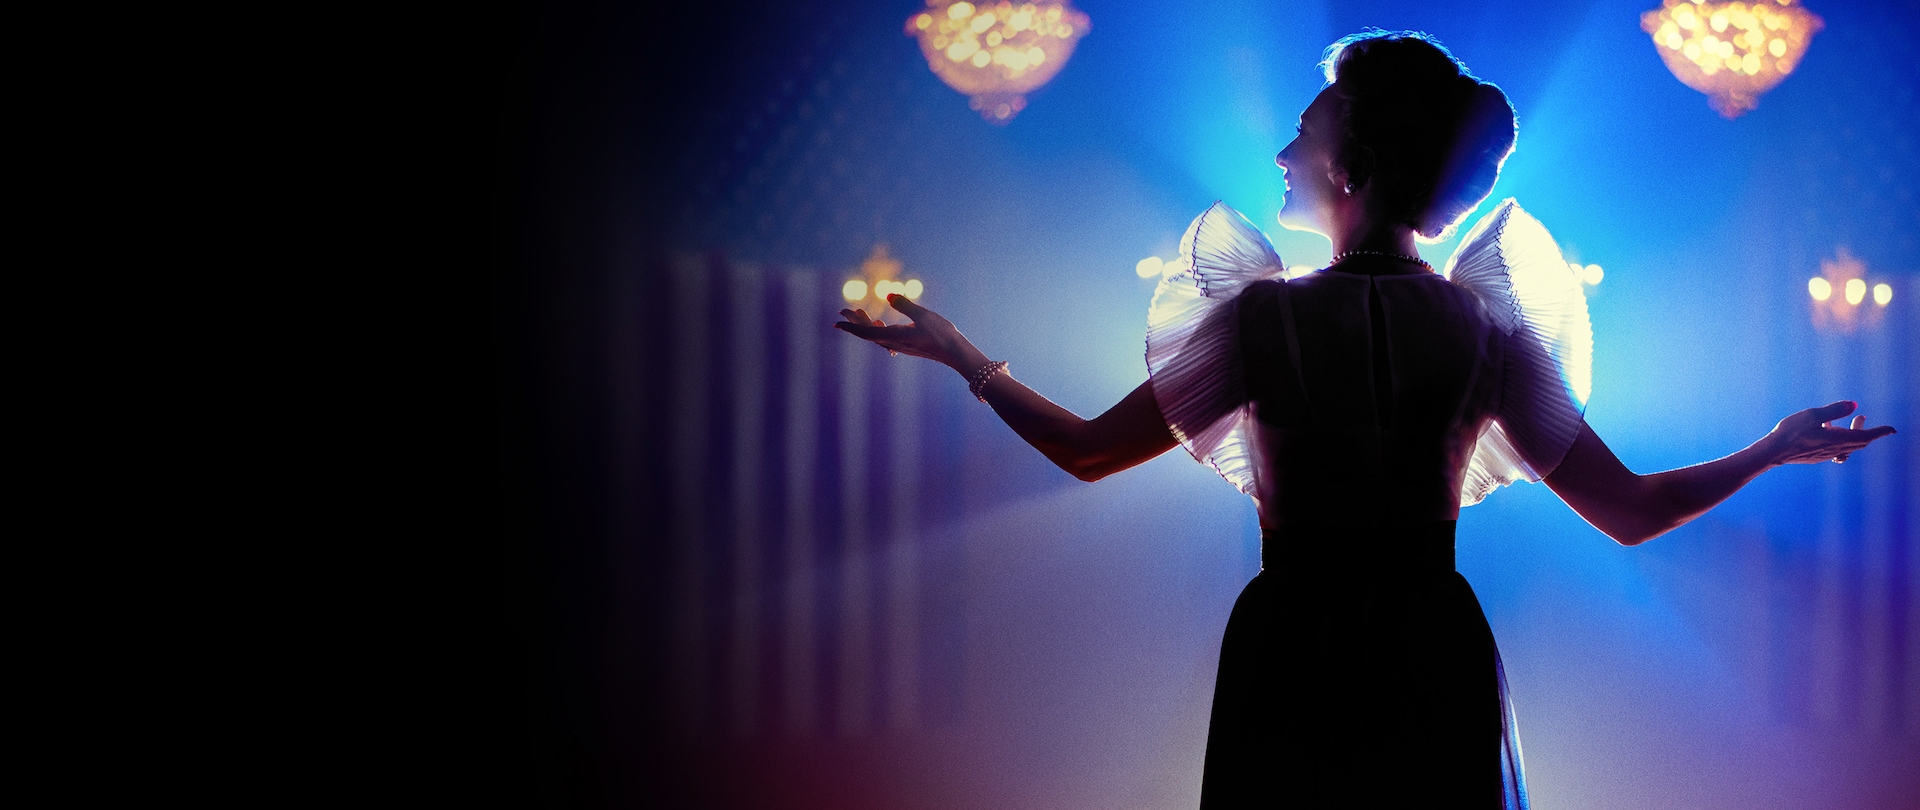 Woman holding arms out wide with blue and red lighting and chandeliers in background